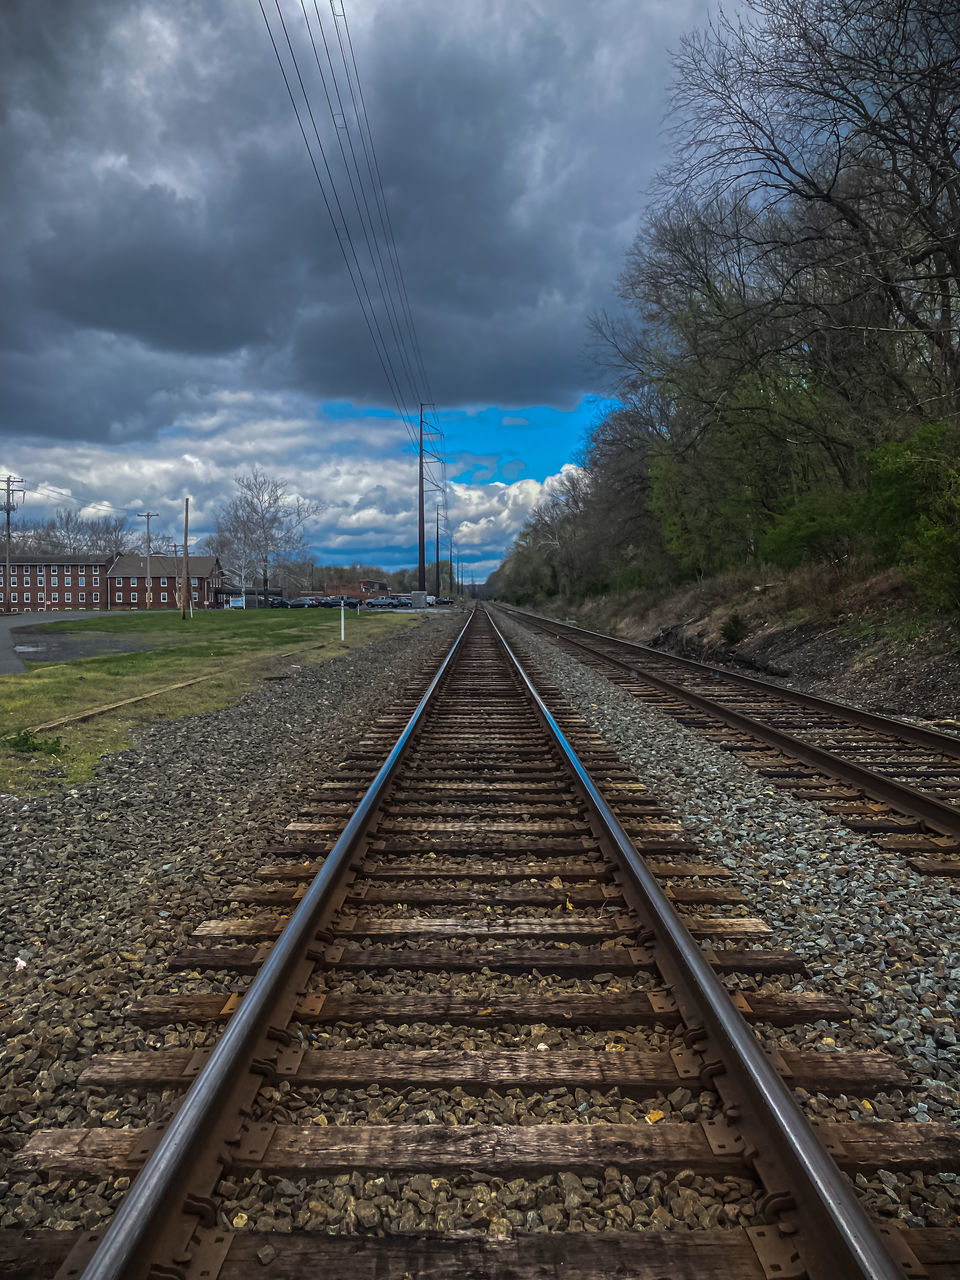 railroad track, track, rail transportation, cloud, sky, transportation, transport, vanishing point, nature, the way forward, diminishing perspective, no people, railway, electricity, mode of transportation, cable, tree, vehicle, environment, architecture, outdoors, plant, public transportation, parallel, storm, travel, line, straight